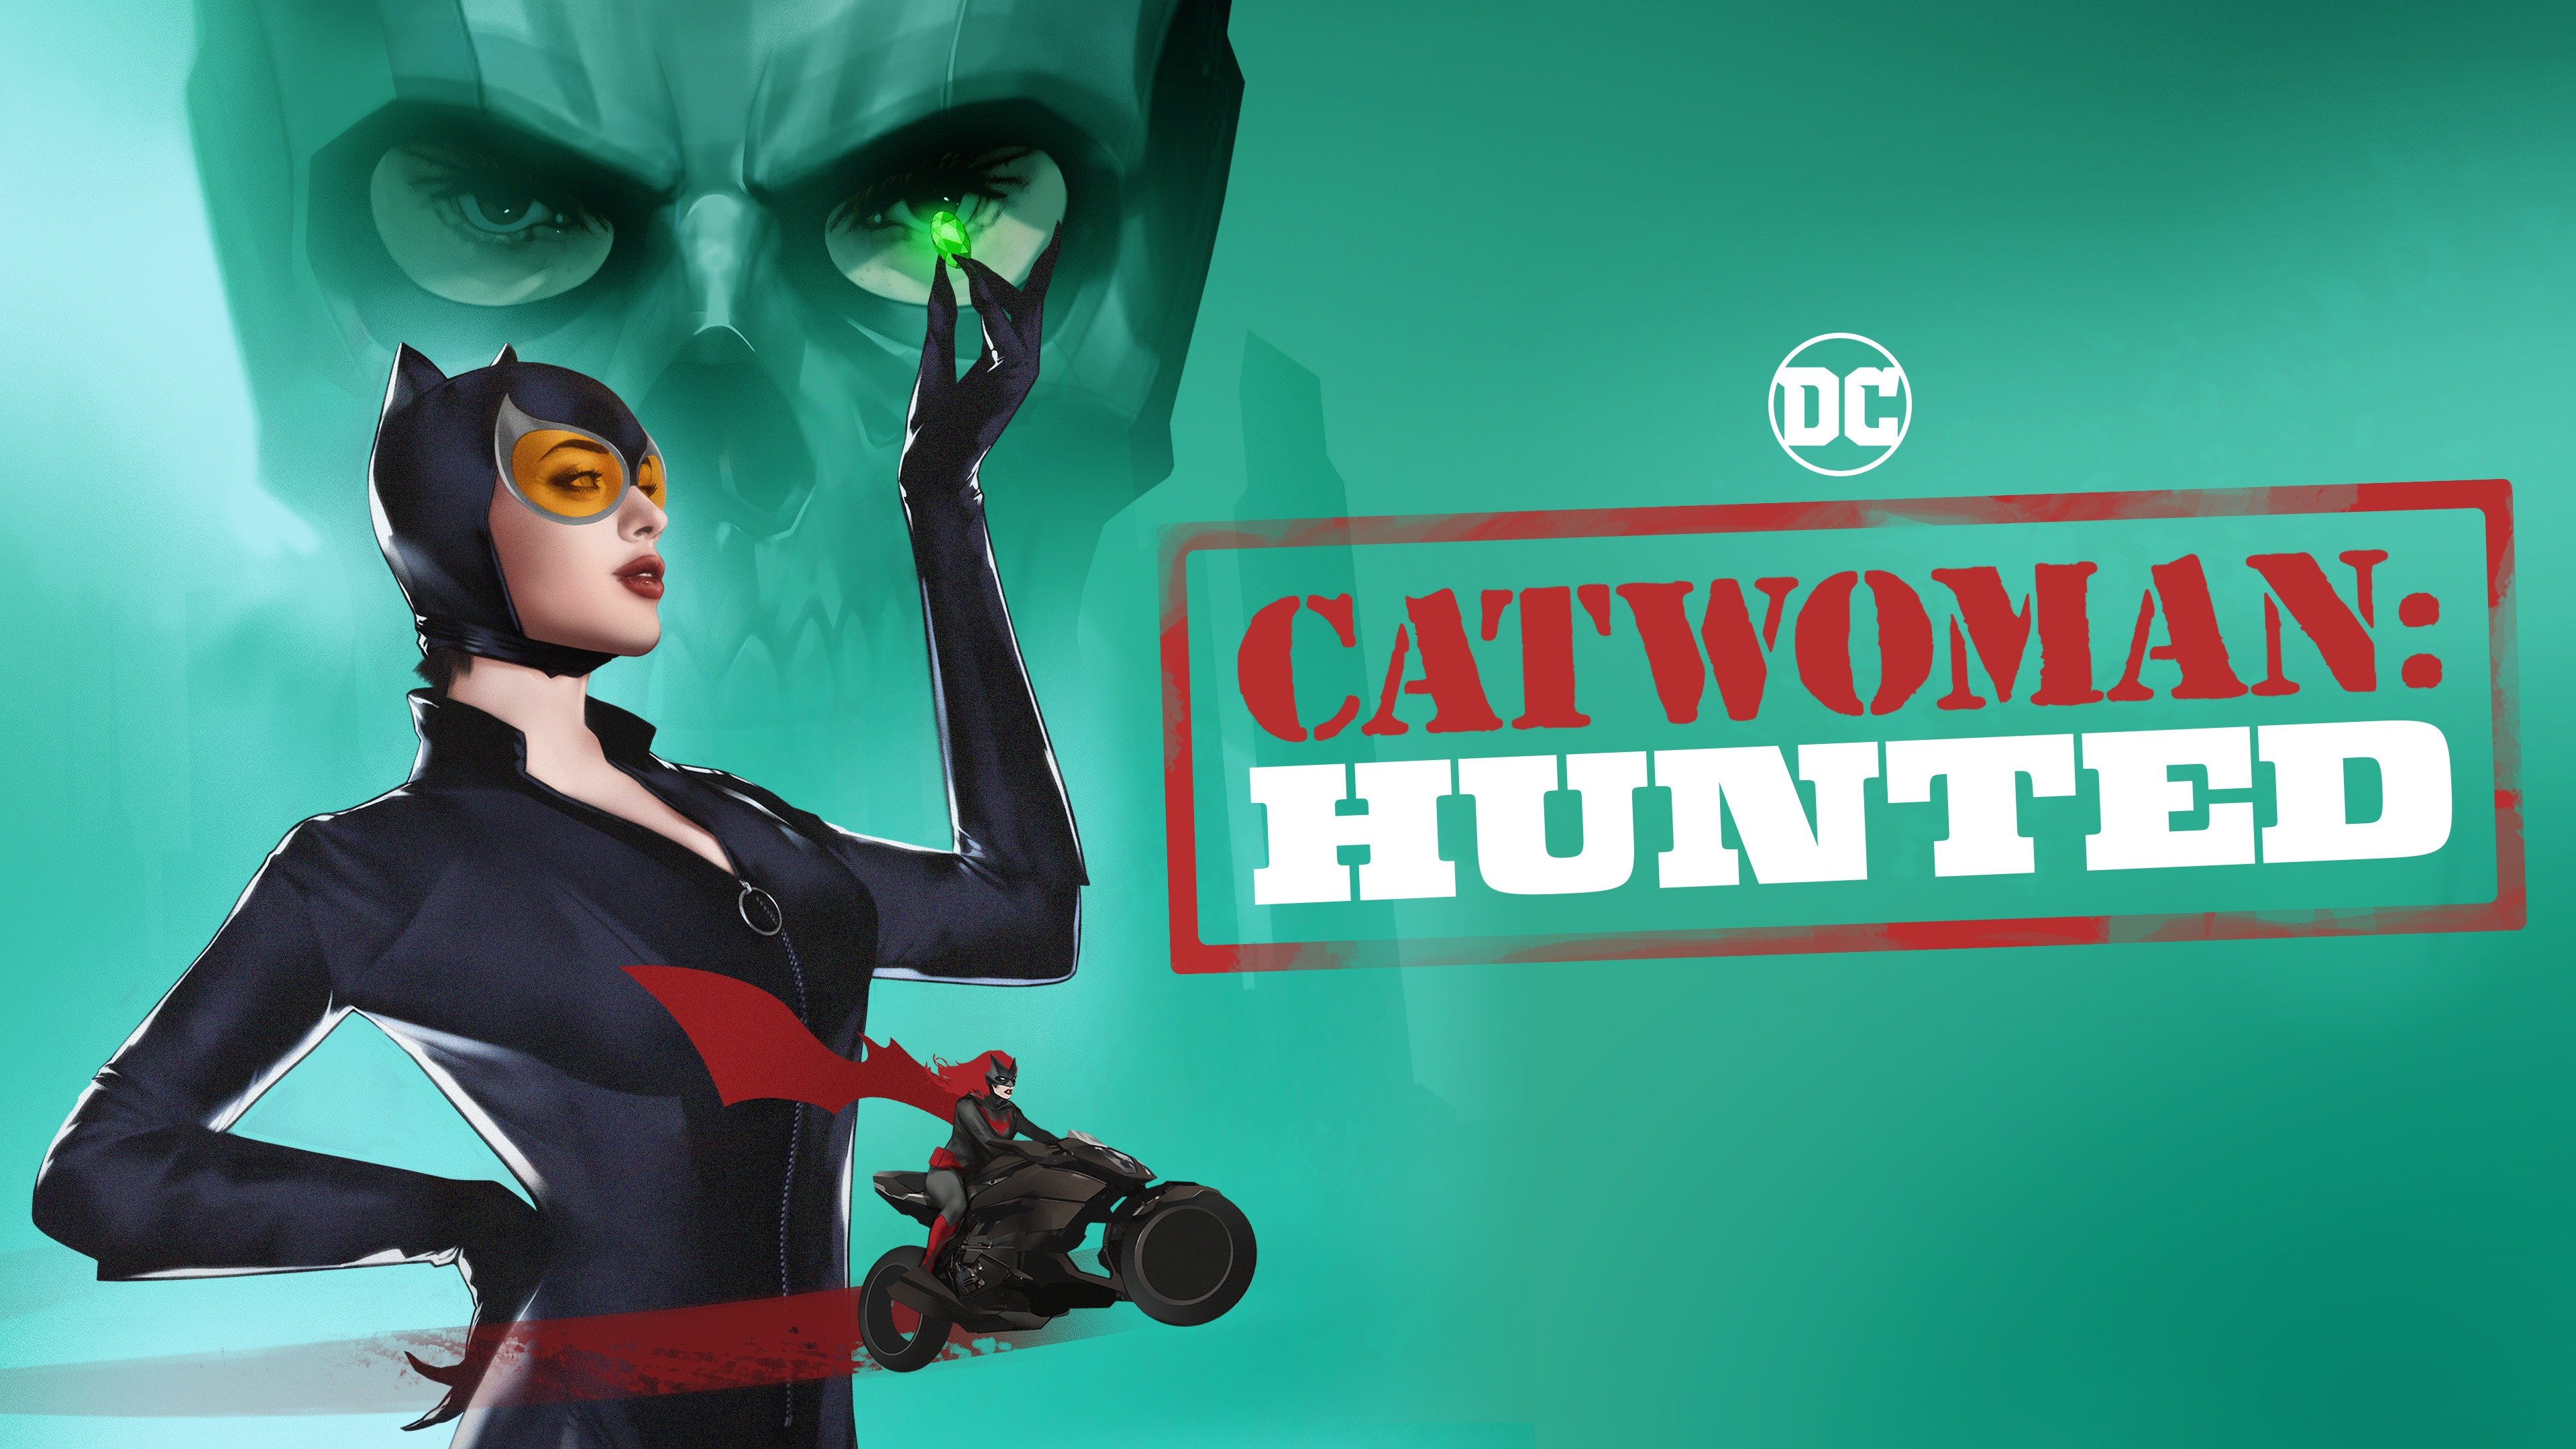 Catwoman Hunted: Girl on Girl Action - Comic Watch